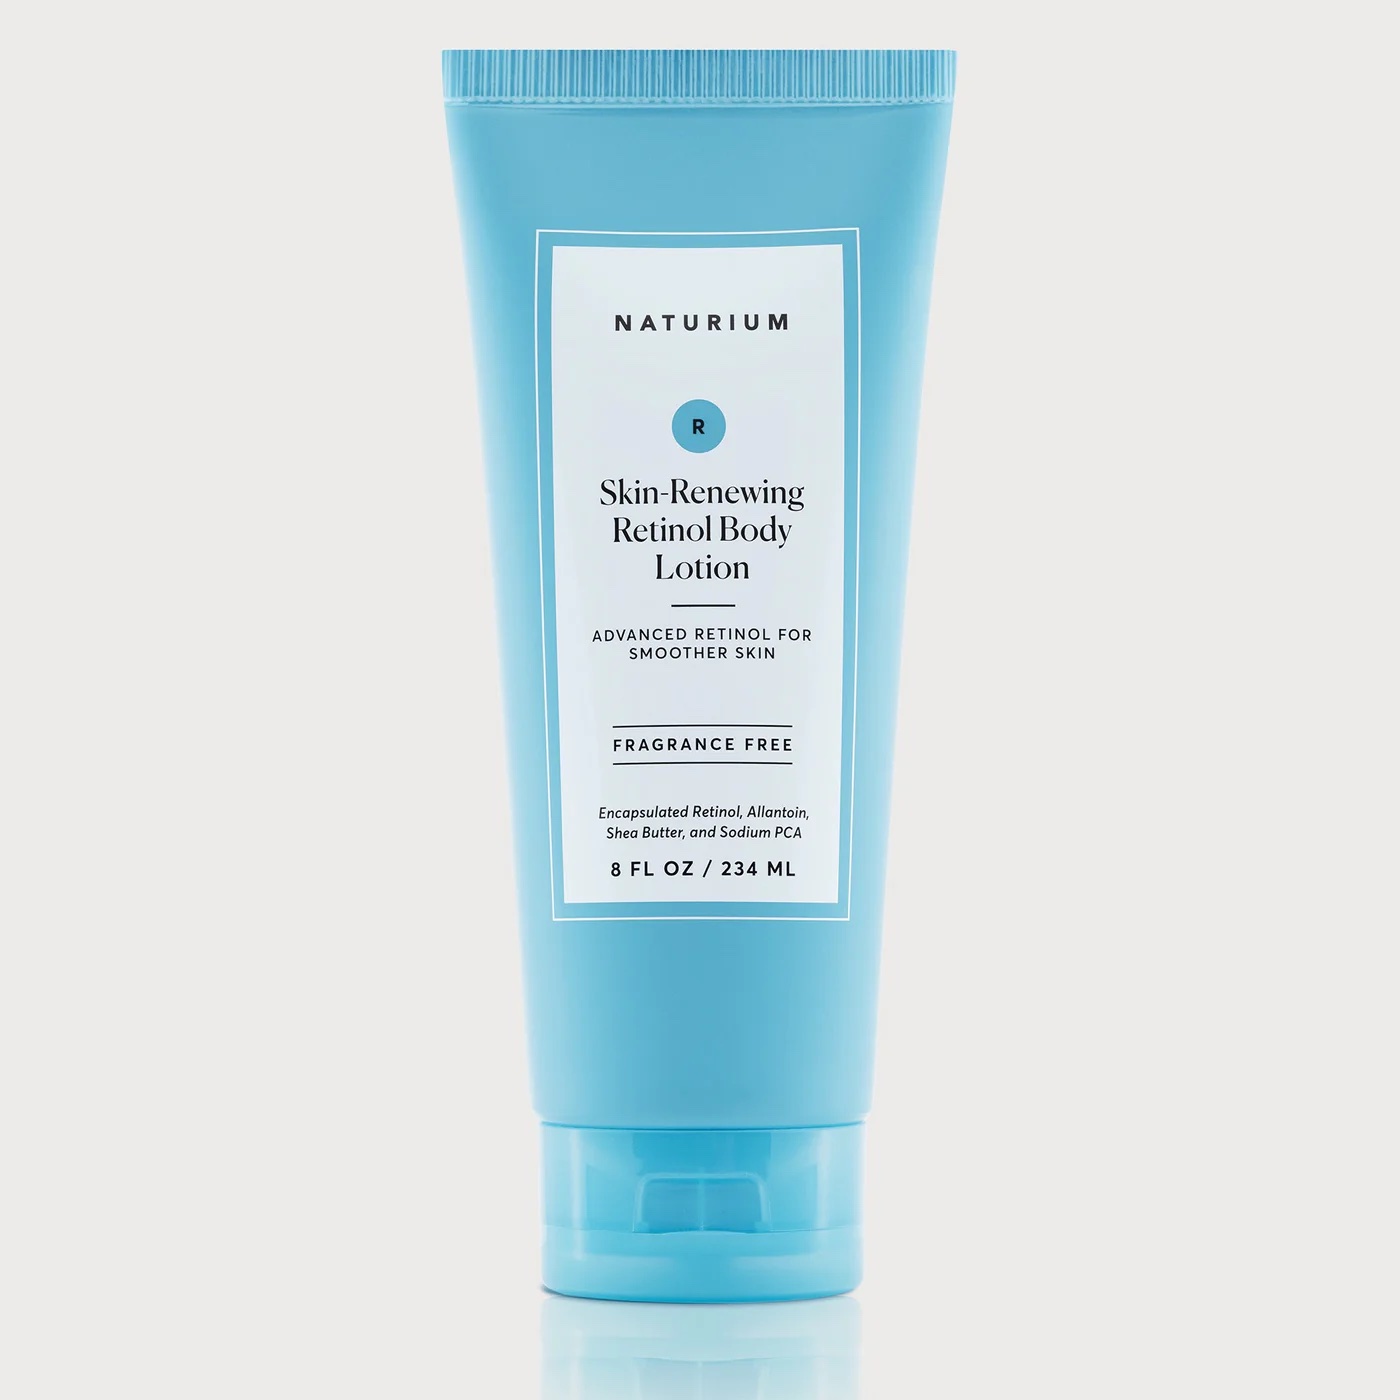 naturium retinol body lotion in a blue tube shown on a white background